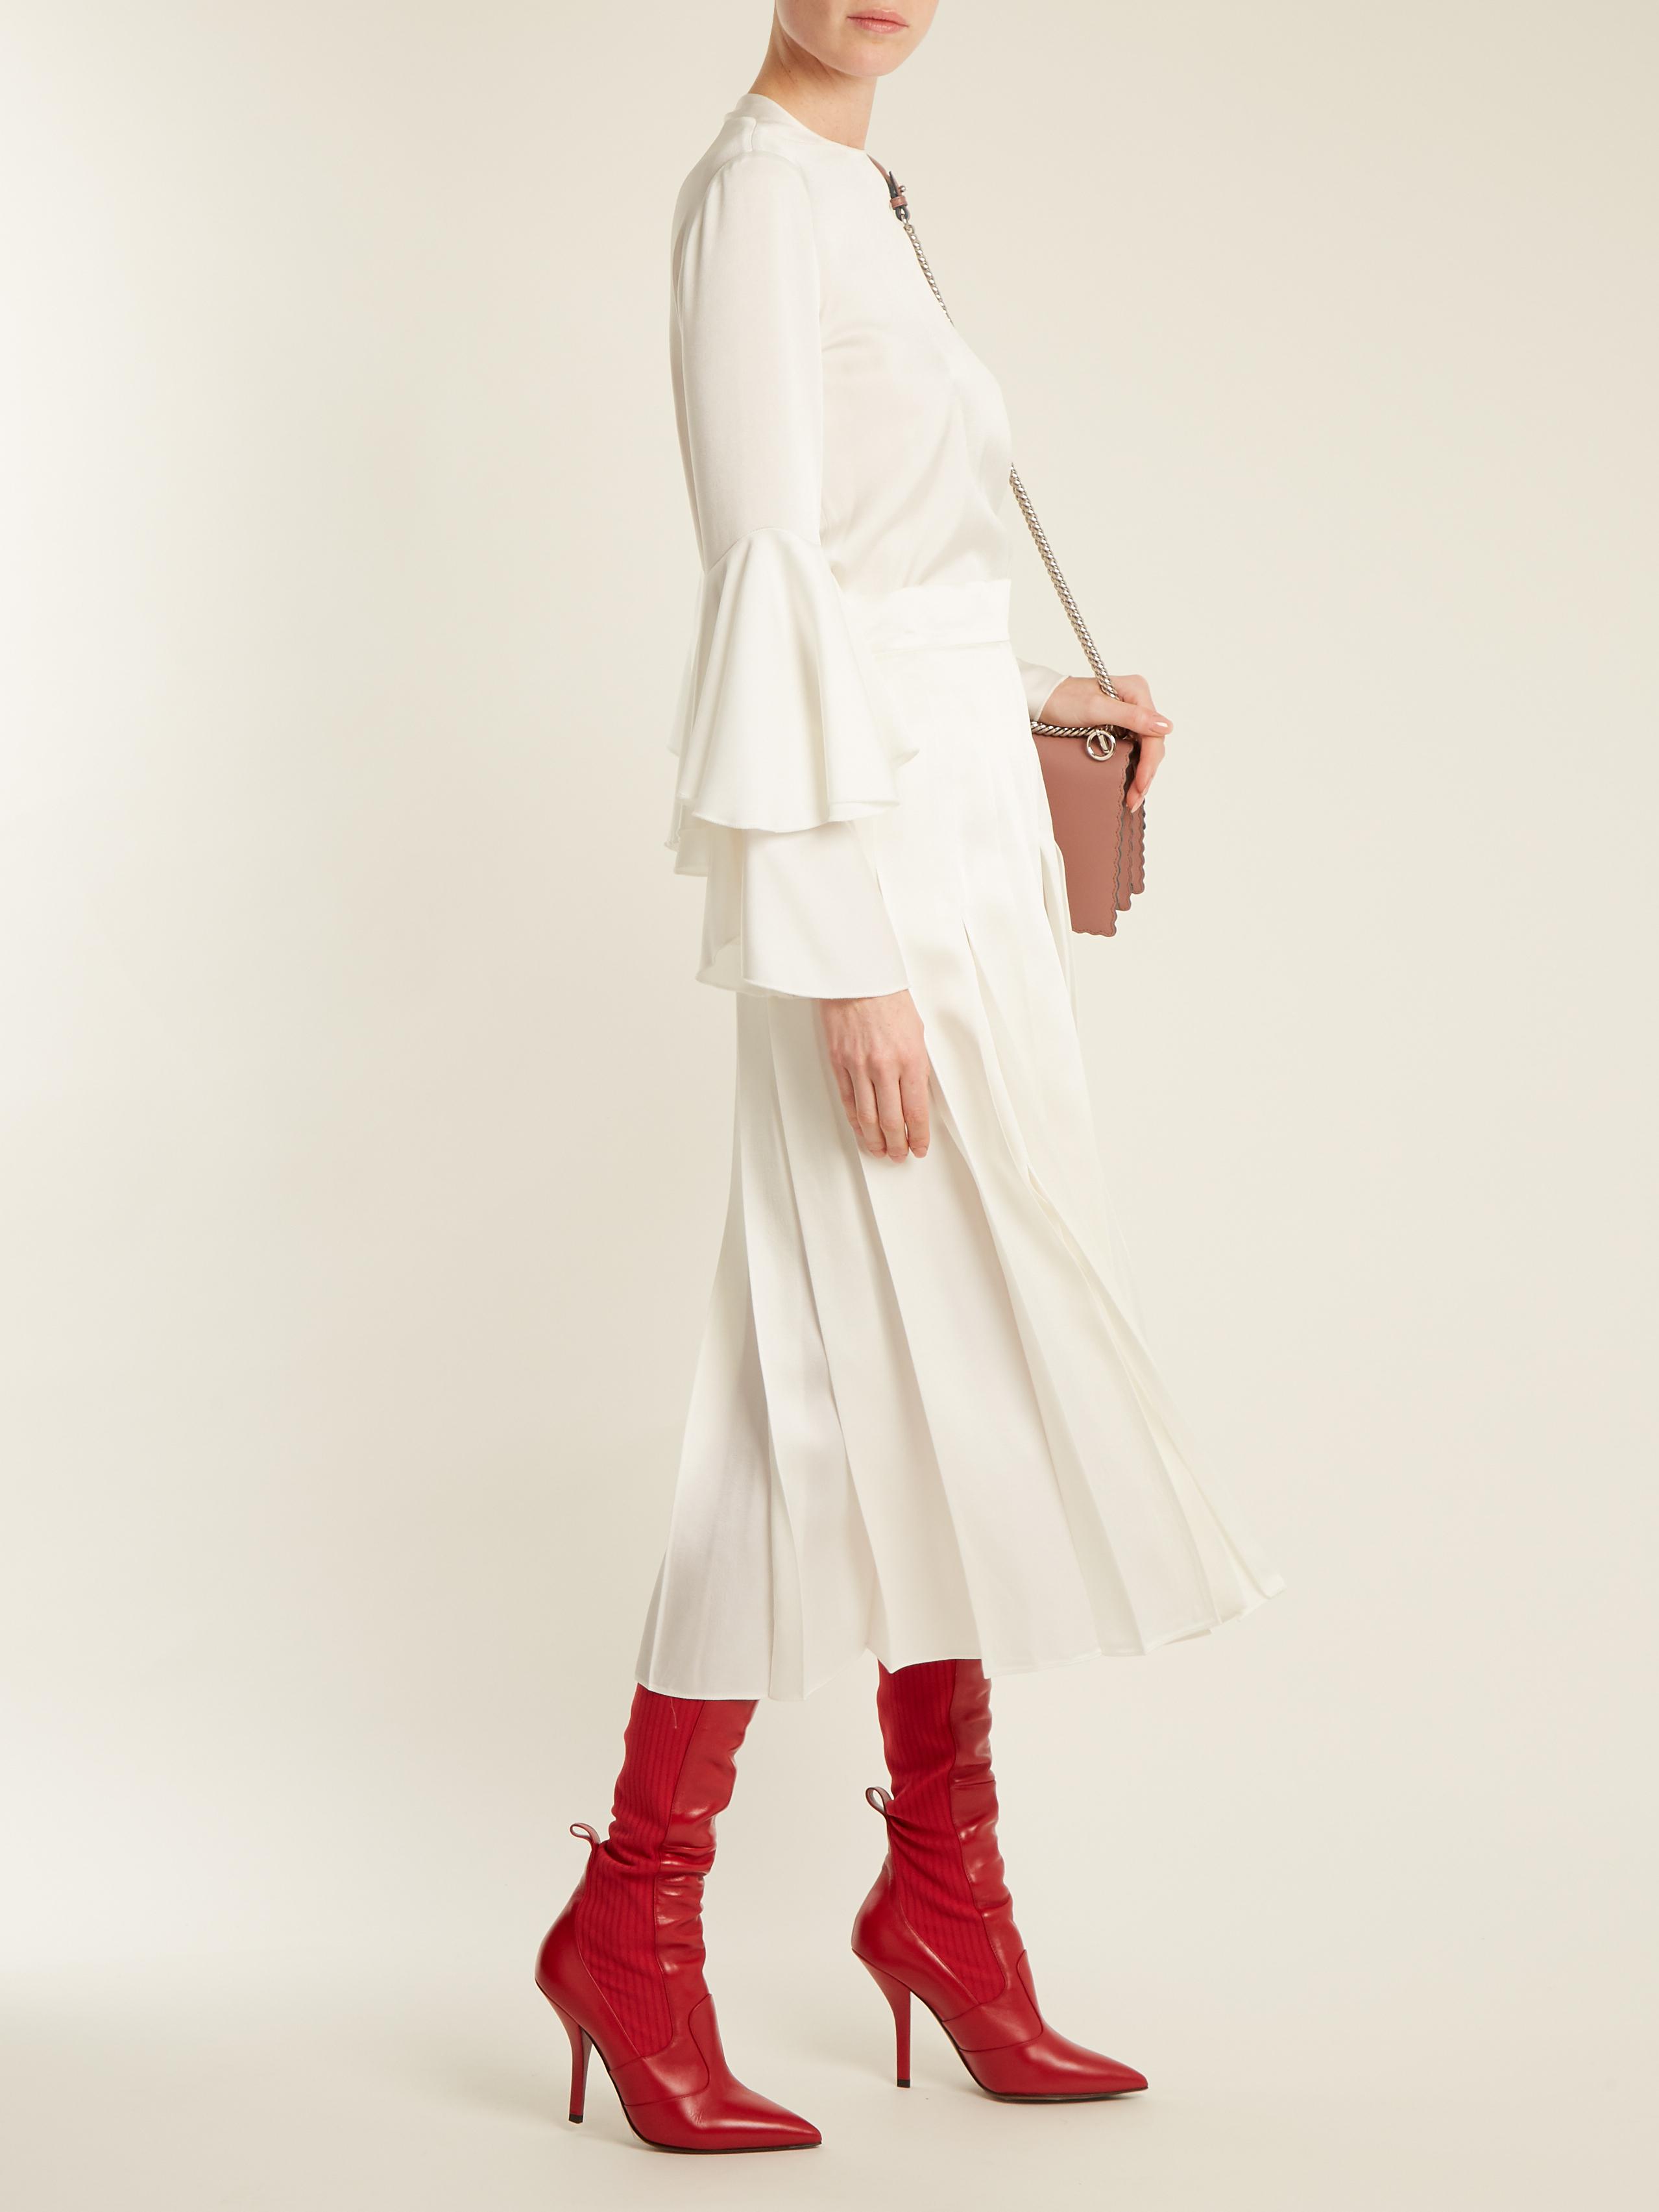 Fendi 105mm Leather & Knit Over The Knee Boots in Red | Lyst